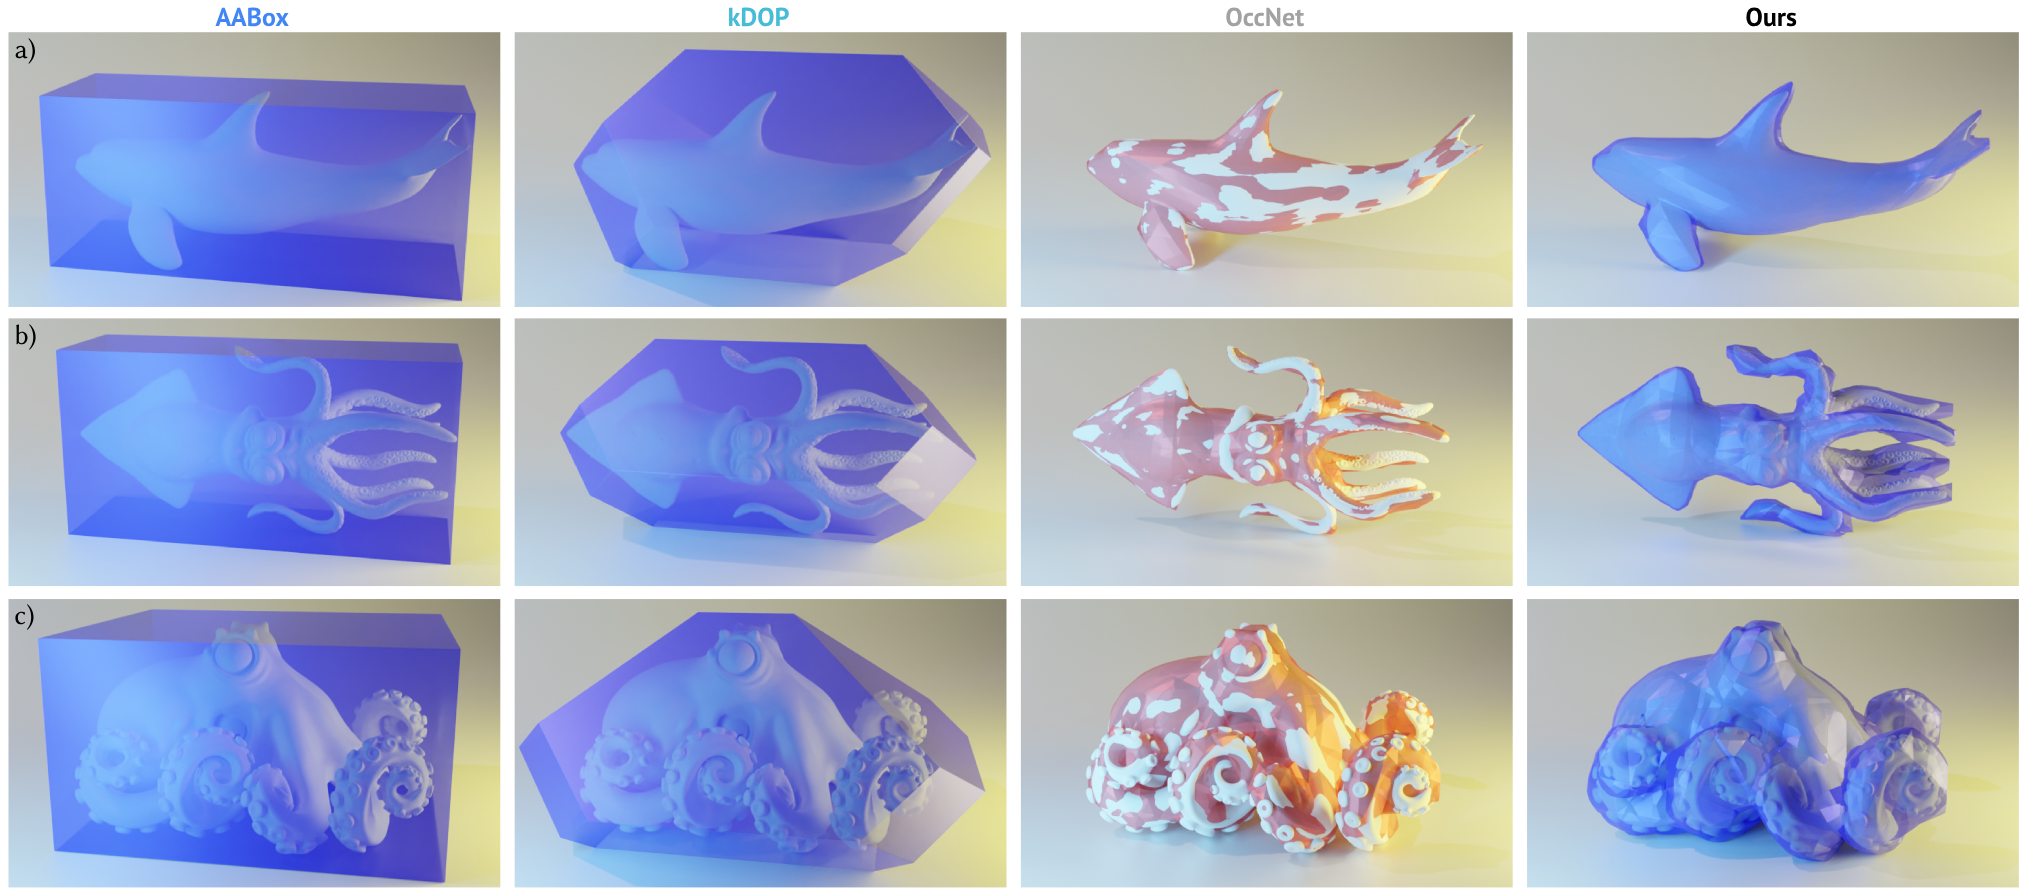 3d point for three objects - whale, squid and octopus - rotating 360 degrees